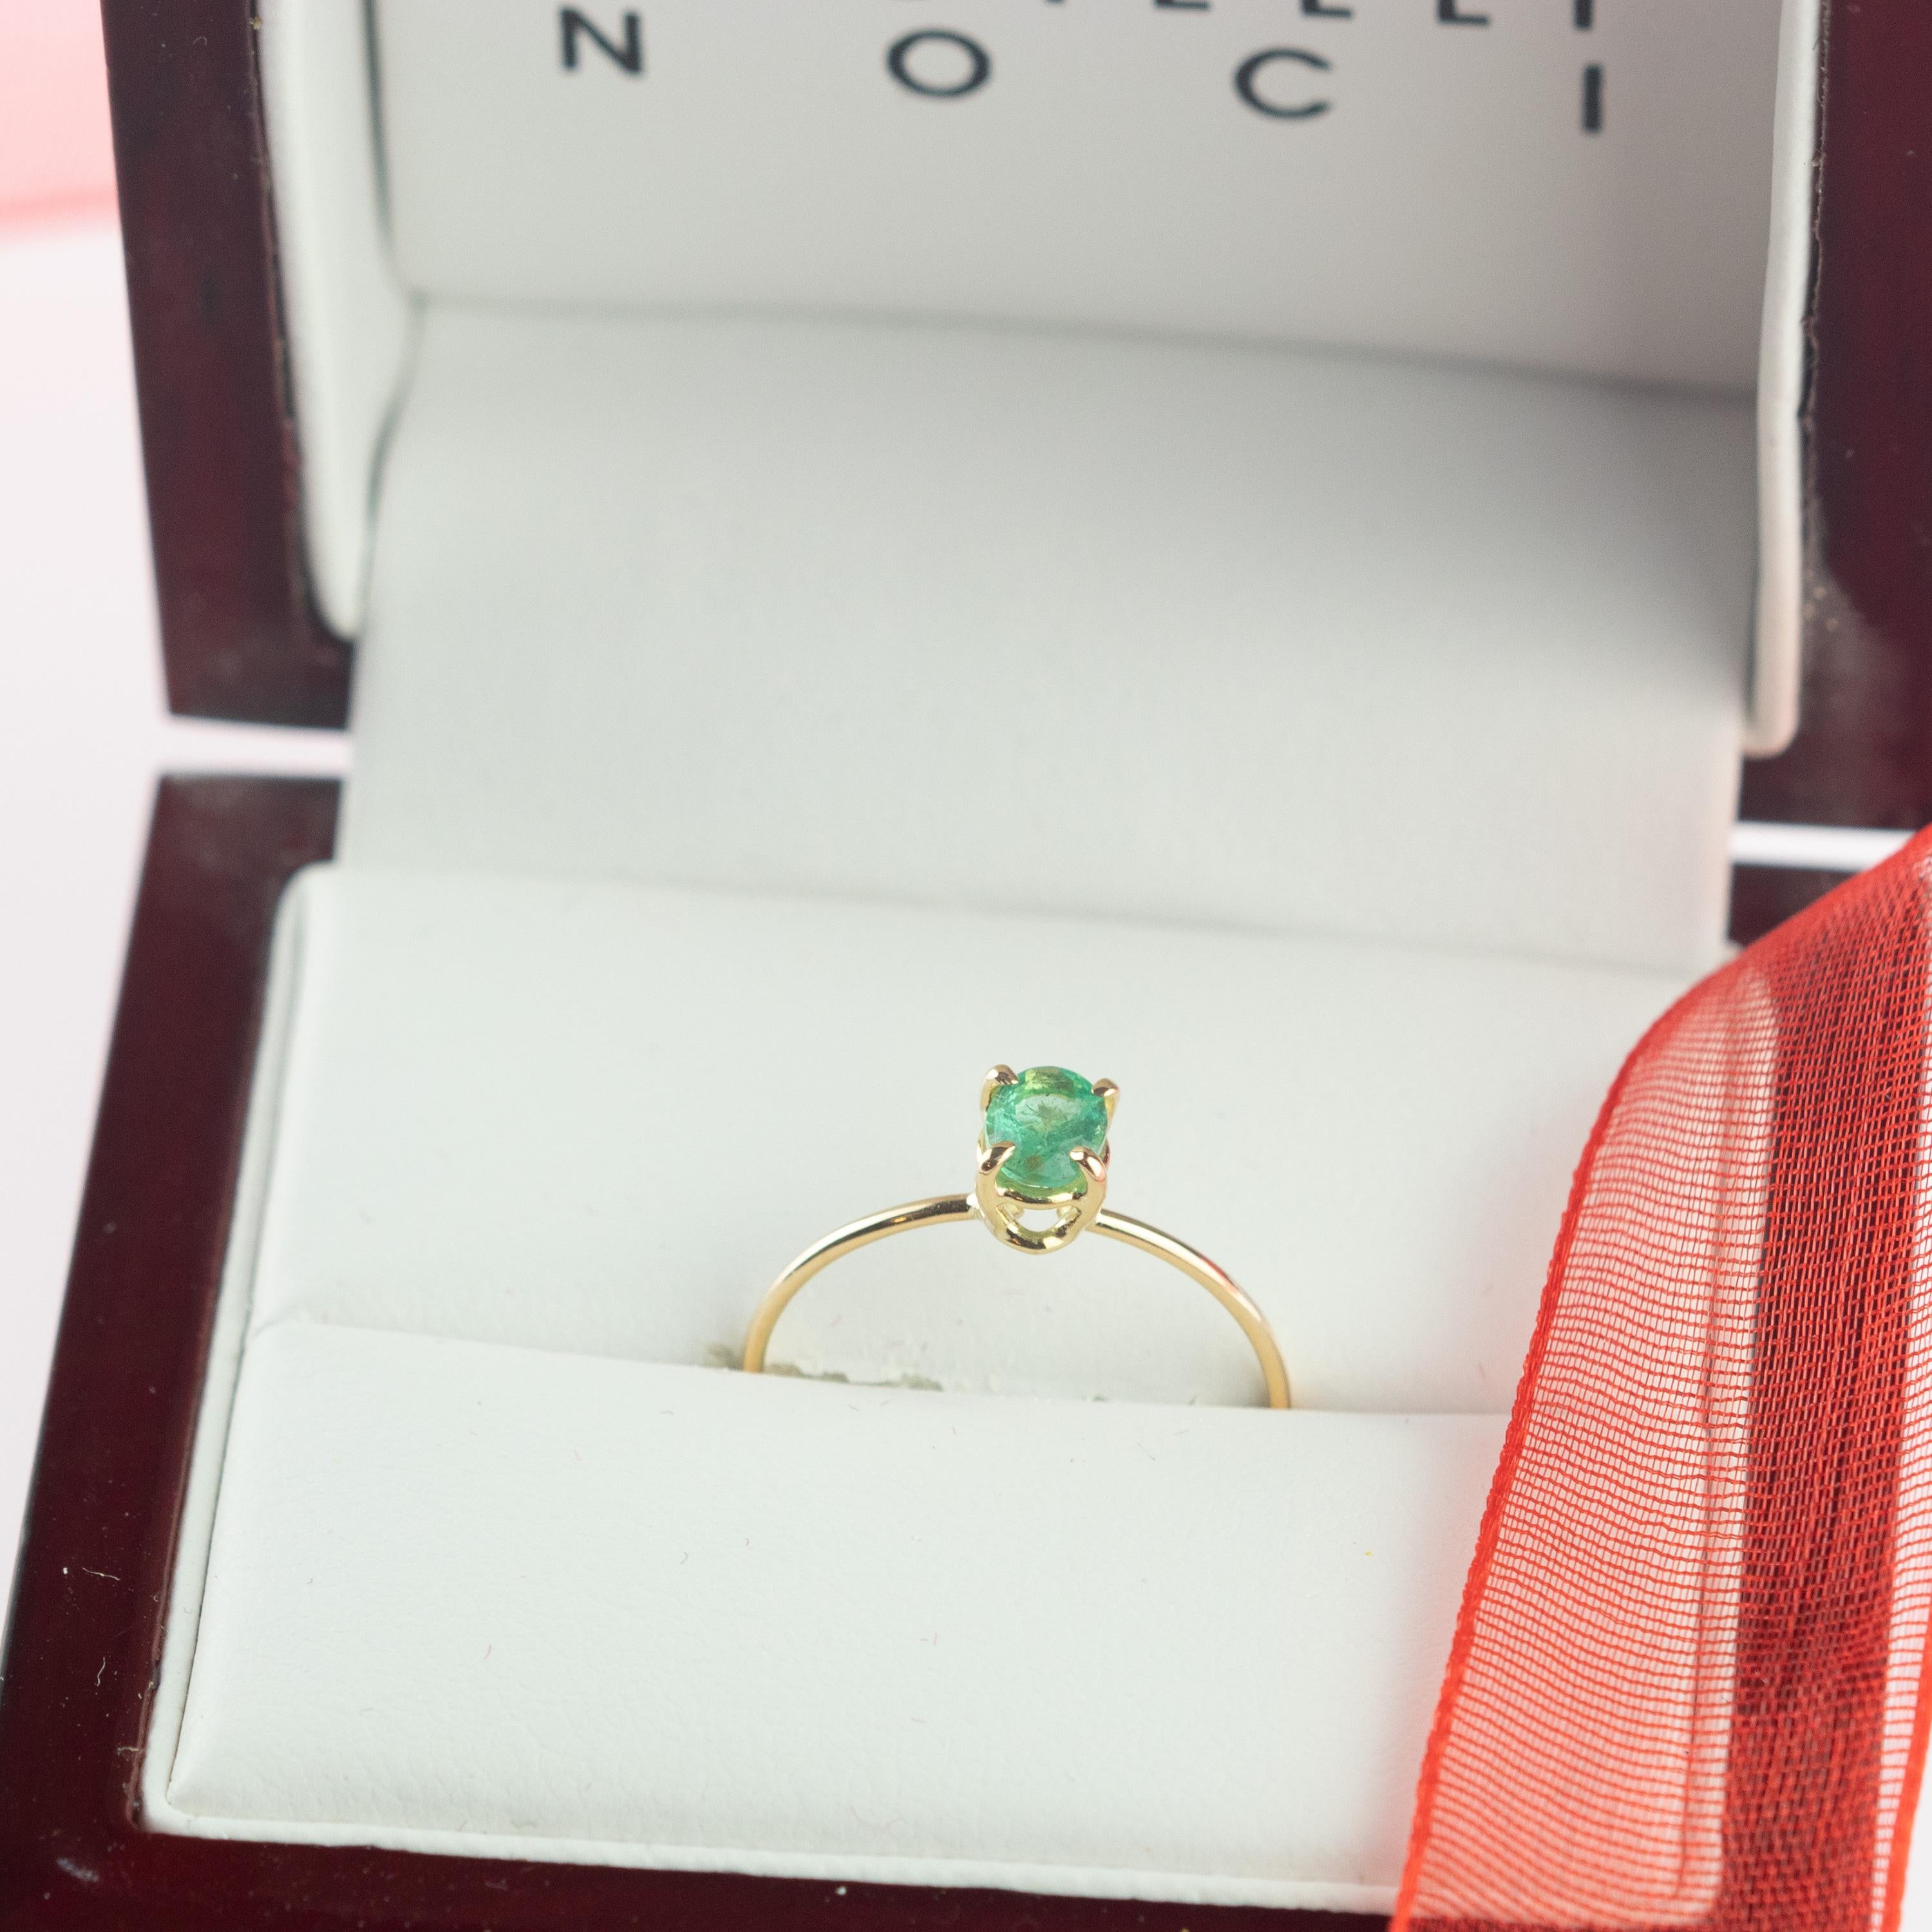 his extraordinary emerald 0.3 carat ring with a high quality emerald and a modern design. Crafted in 9k yellow gold to create a stunning piece of jewelry. This artwork is for an autentic, elegant and modern woman.

Emerald can bring you immense luck